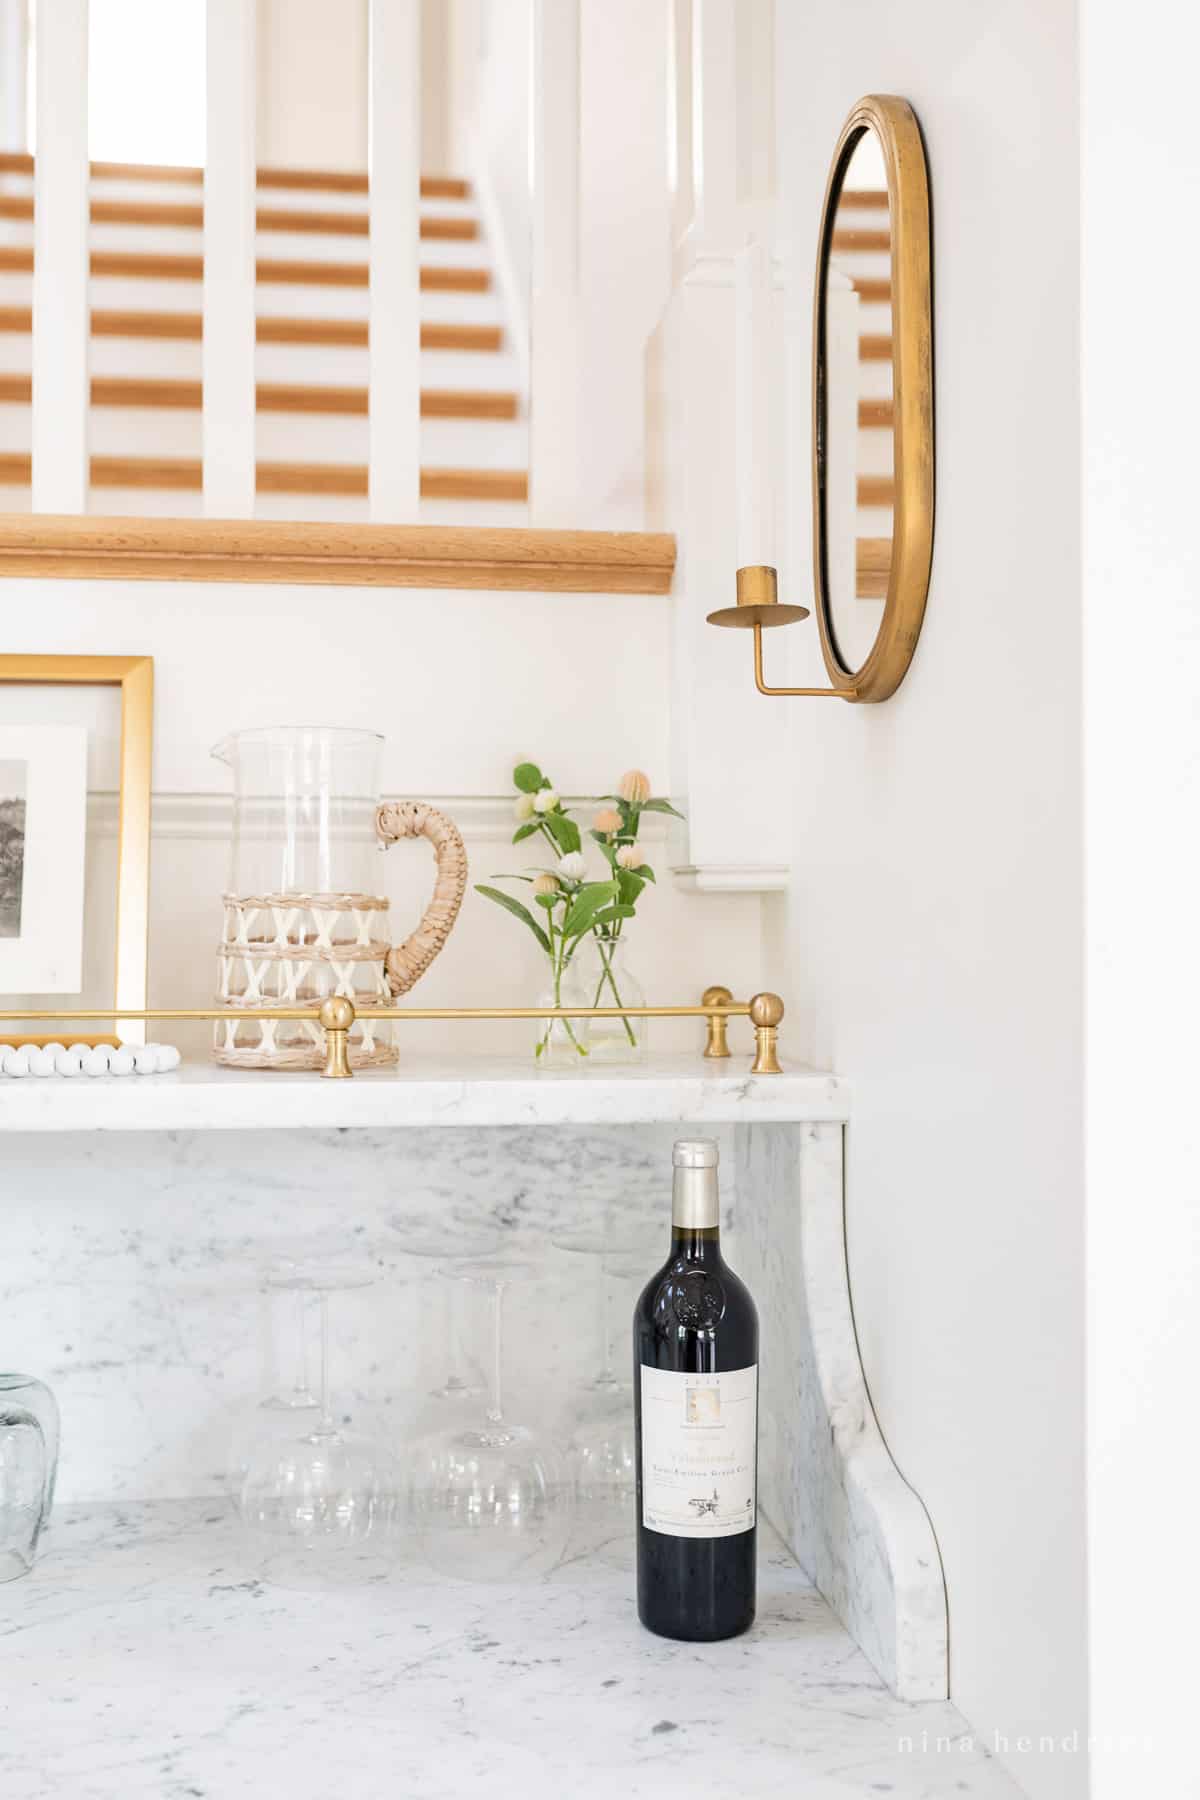 Home bar with bottle of wine and glasses with simple decor